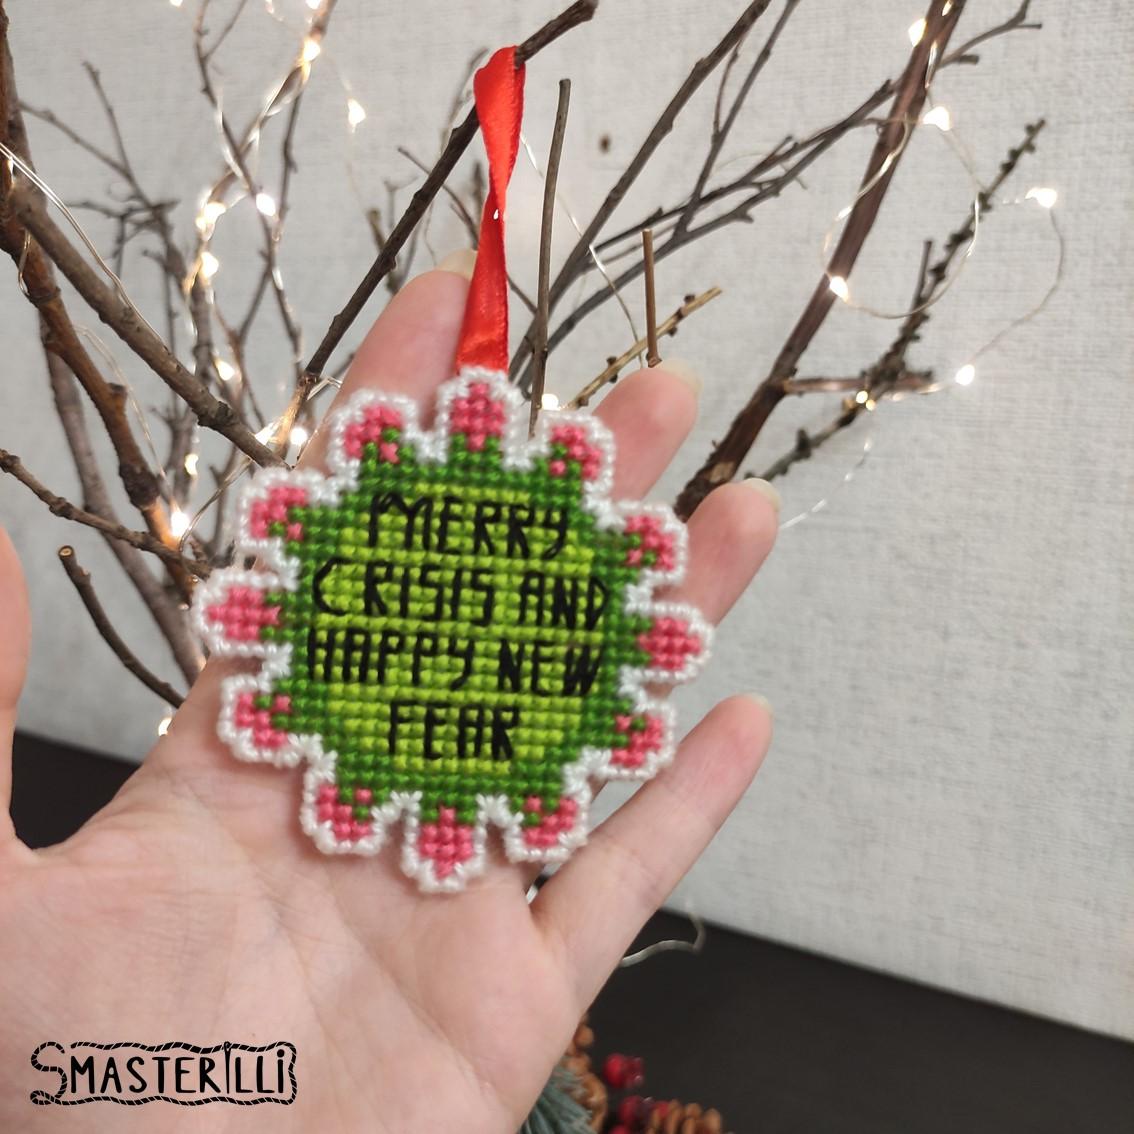 Covid snowflake cross stitch pattern PDF by Smasterilli, funny snowflake pattern and tutorial for plastic canvas. Digital cross stitch pattern for instant download. easy cross stitch for beginners. Christmas handmade crafts. Plastic Canvas Project #smasterilli #crossstitch #crossstitchpattern #wintercrossstitch #christmascrossstitch #plasticcanvas #covidchristmas #covidcraft